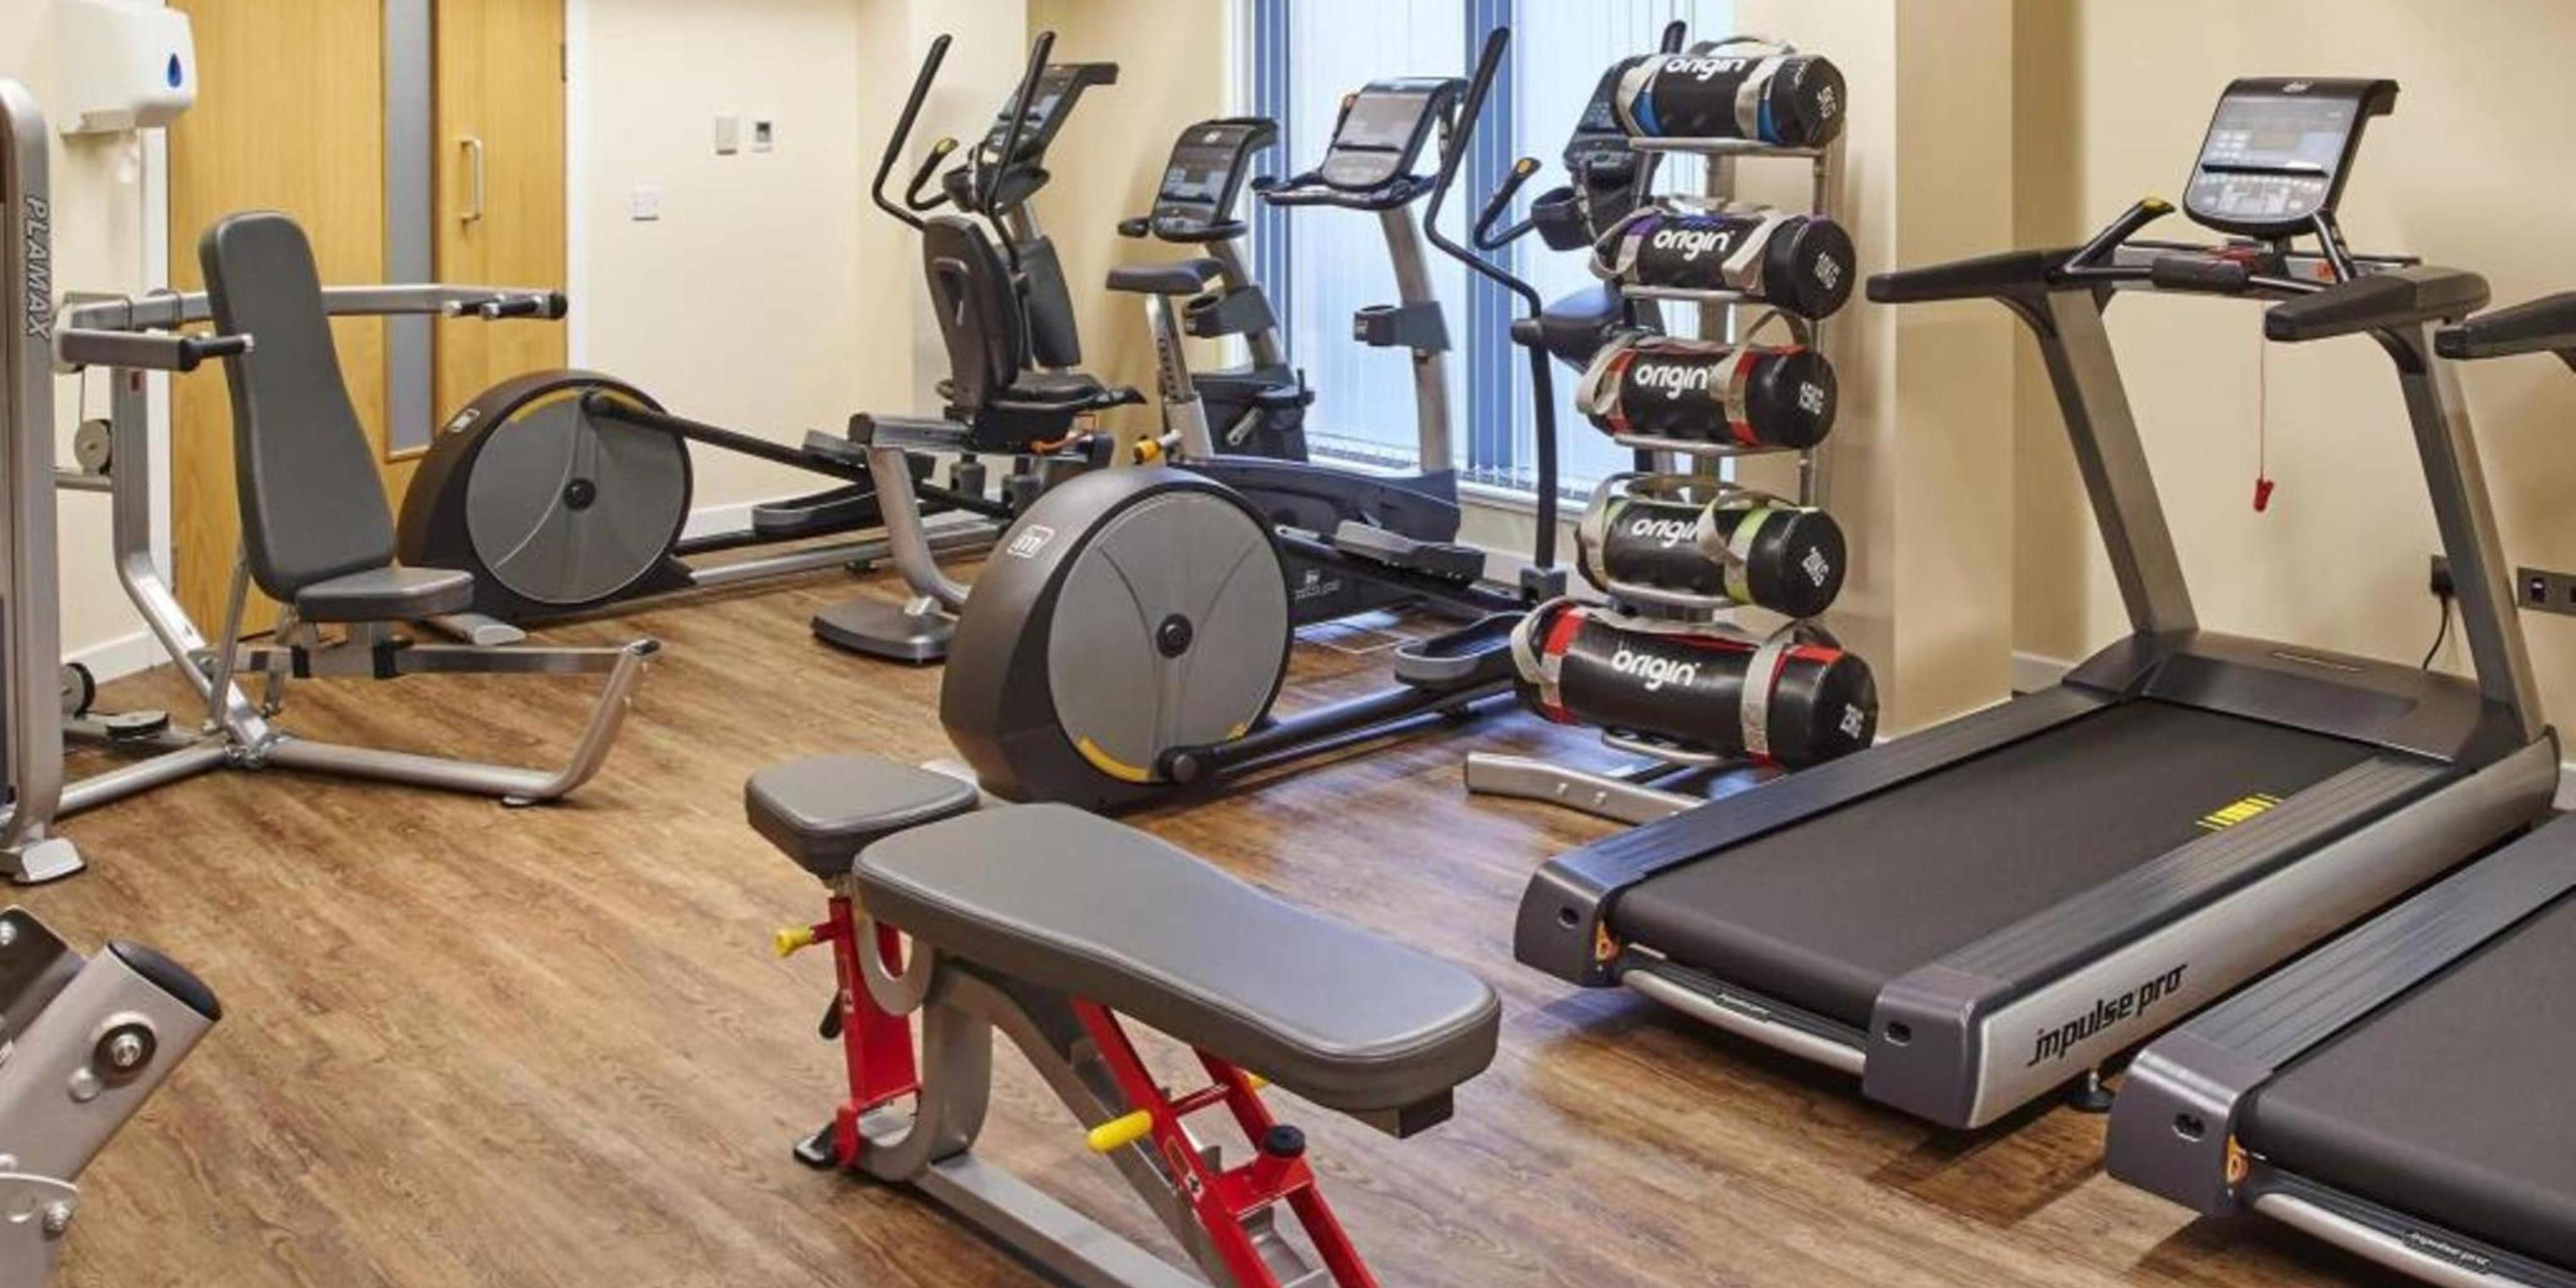 Our newly refurbished gym is conveniently situated within the hotel and offers a fresh and smart way to keep you on your fitness toes during your stay with us.